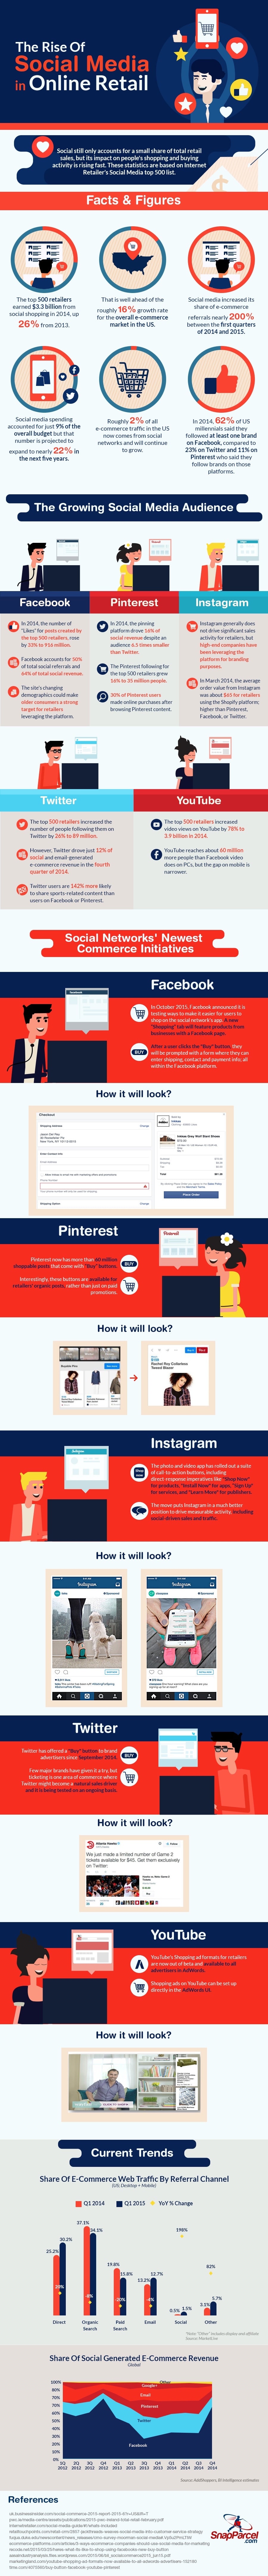 The Rise of Social Media in Online Retail infographic